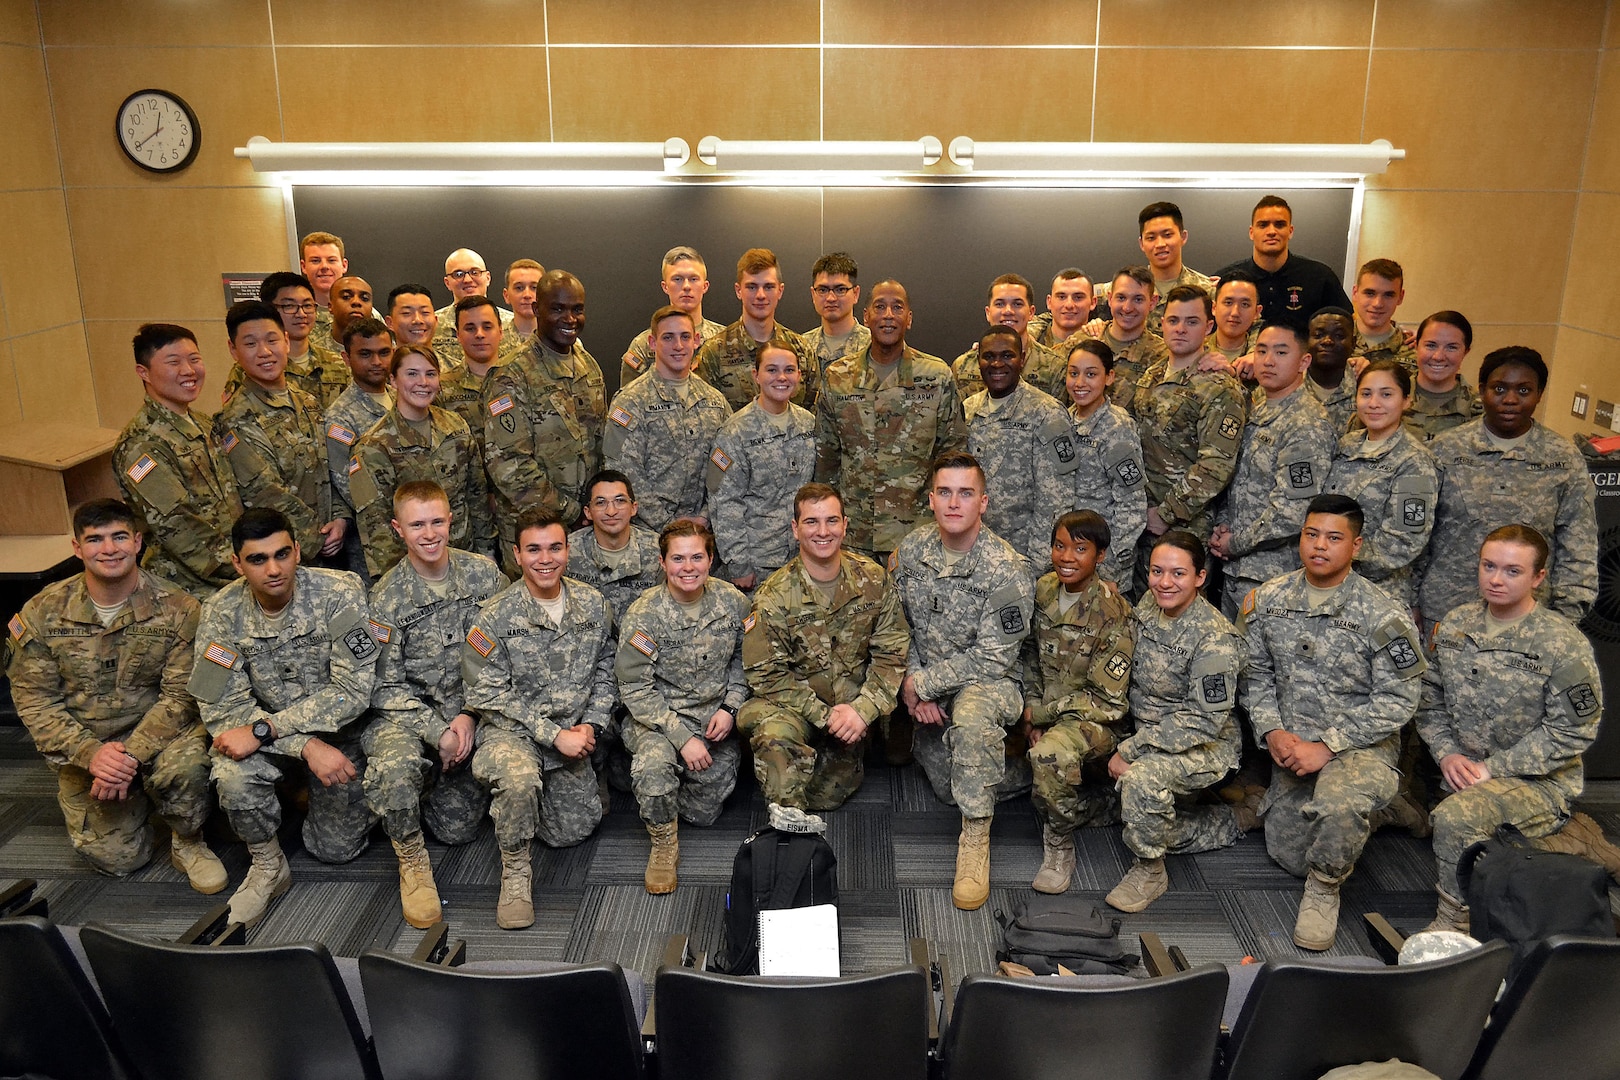 Army Brig. Gen. Charles Hamilton, Defense Logistics Agency Troop Support commander, stands with ROTC cadets at Rutgers University, New Brunswick, N.J., Feb. 23. He advised the cadets that to be successful, officers must ensure their units are highly fit, highly trained and highly disciplined.